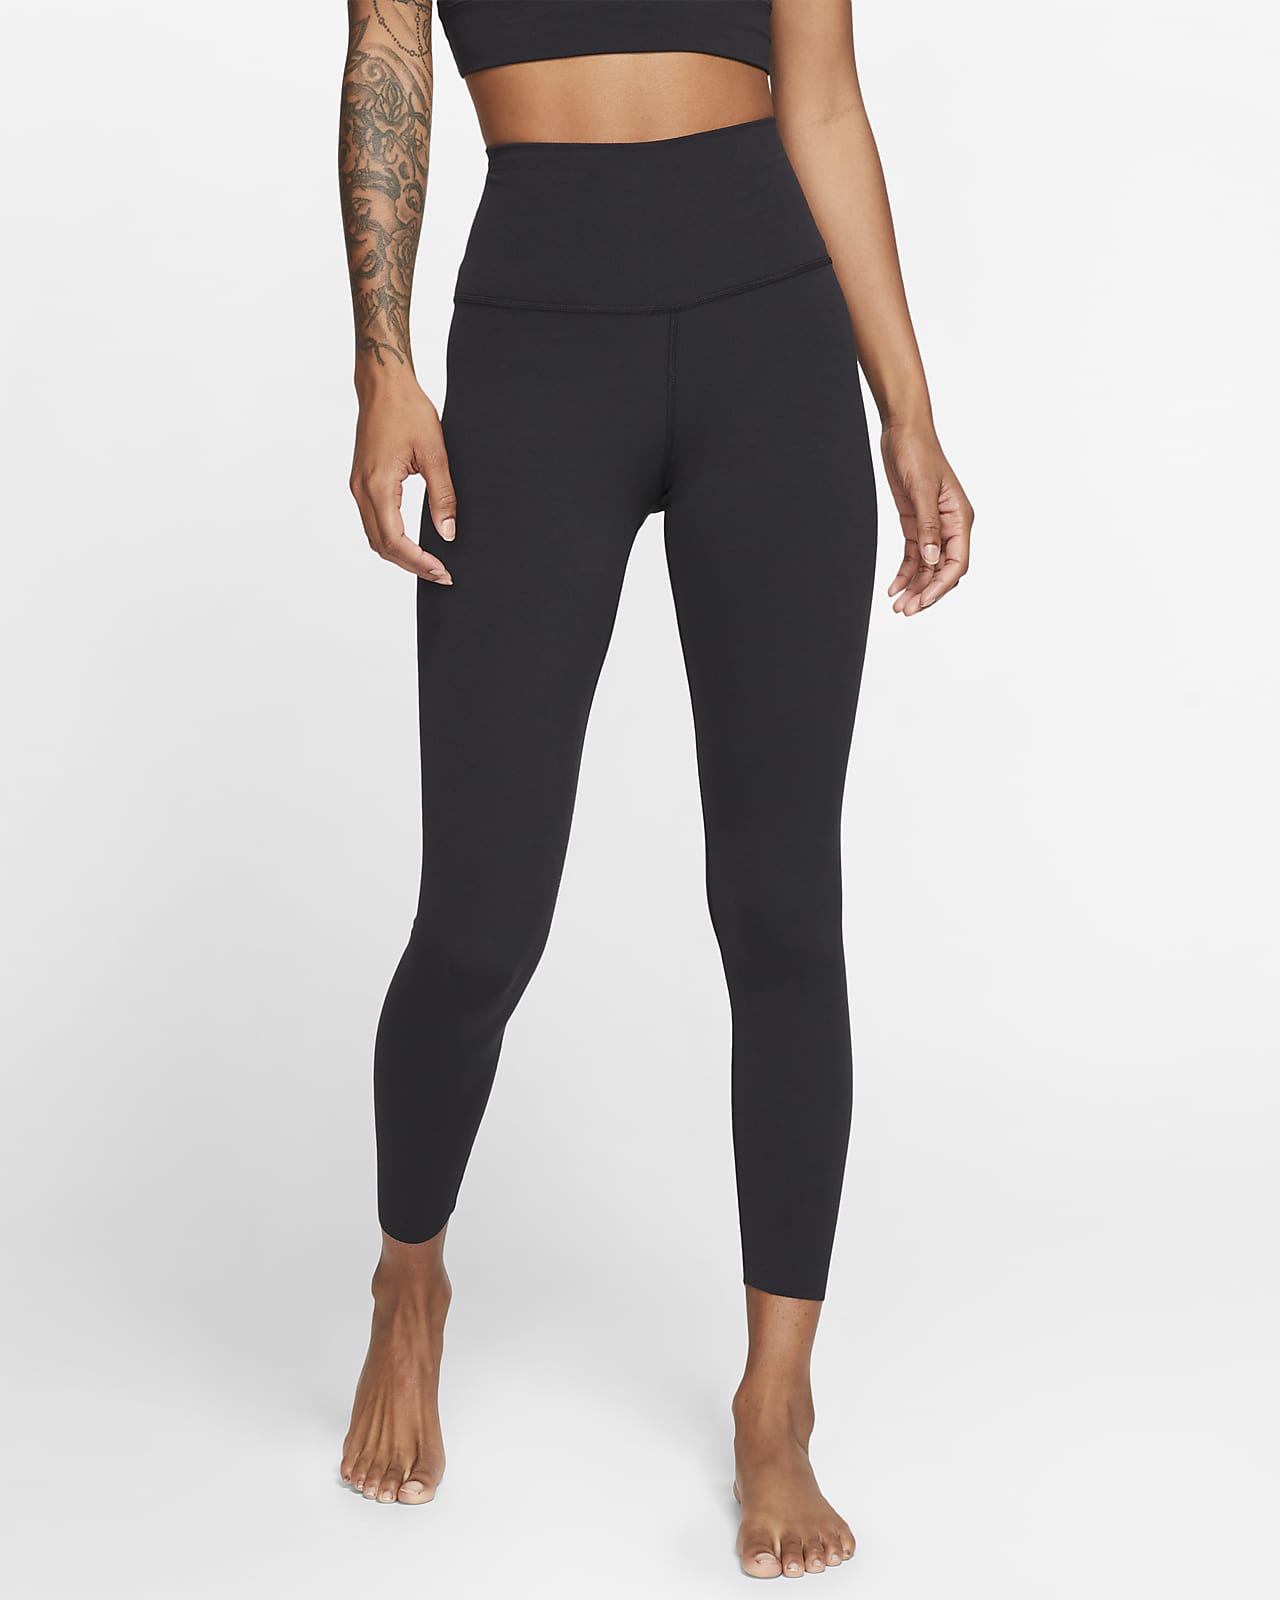 nike women's tights with pocket